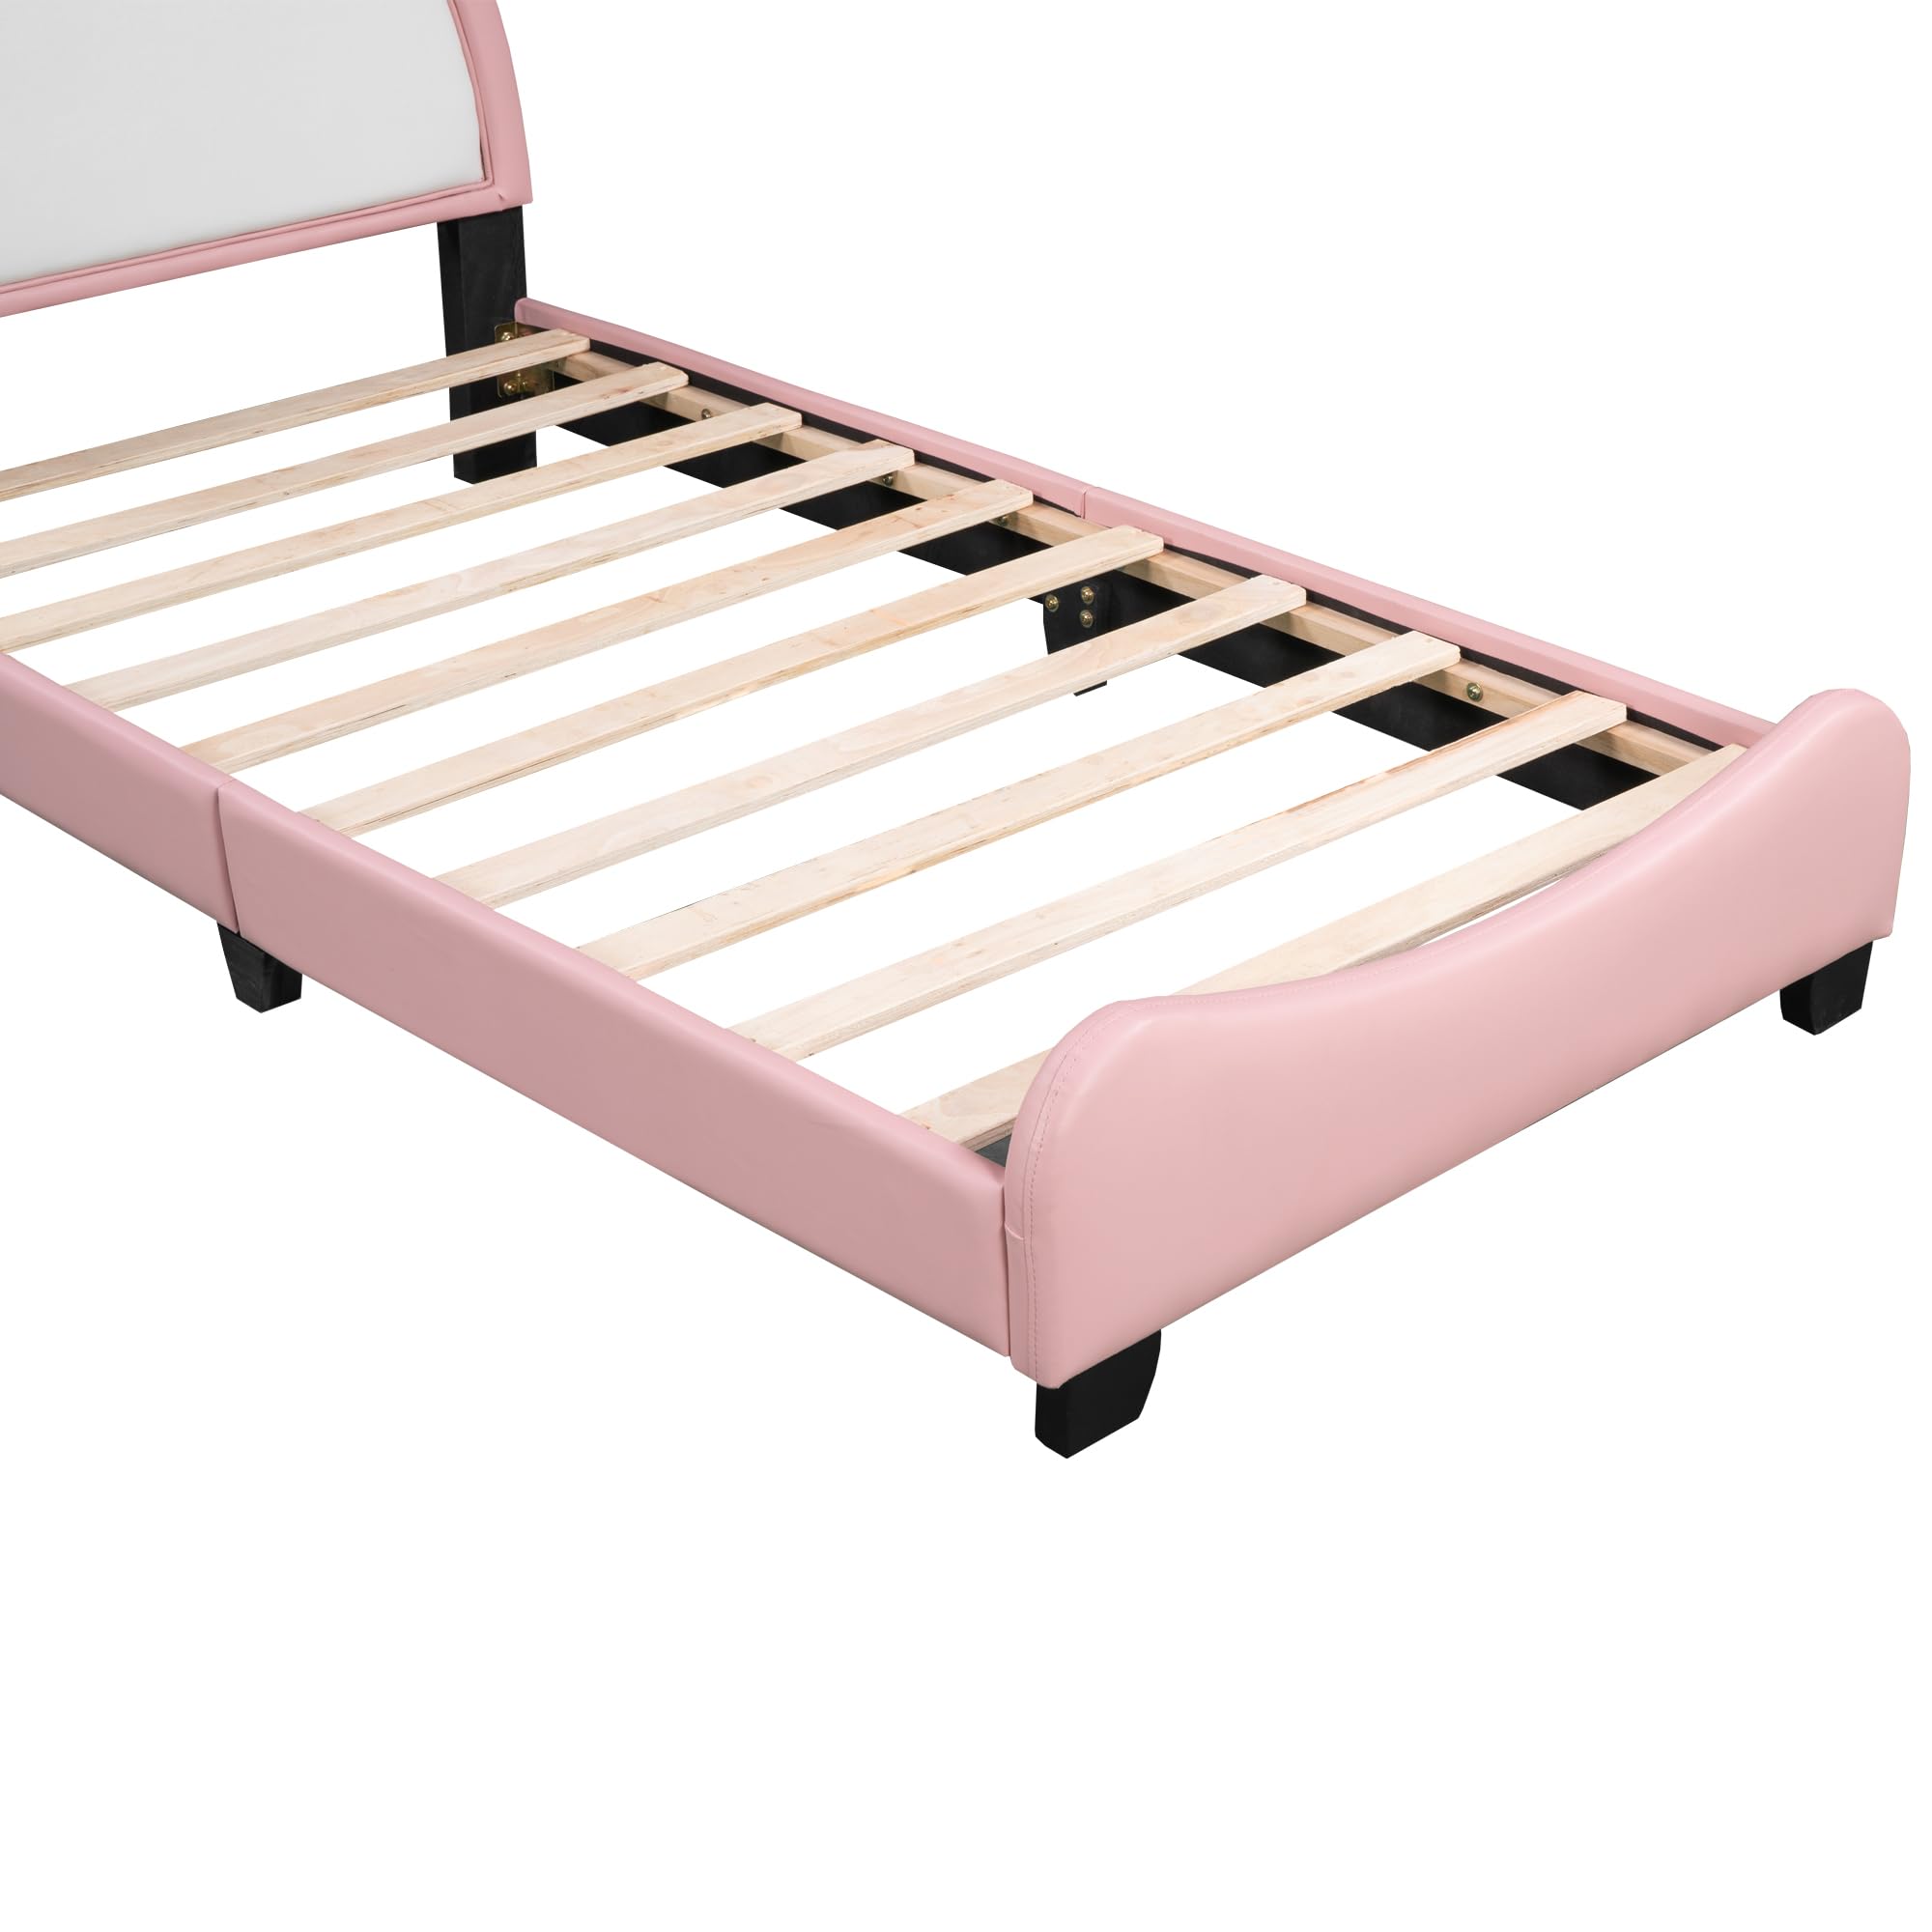 Harper & Bright Designs Kids Twin Upholstered Bed with Unicorn Shape Headboard, Cute Twin Size Platform Bed Frame, No Box Spring Needed (White+Pink)